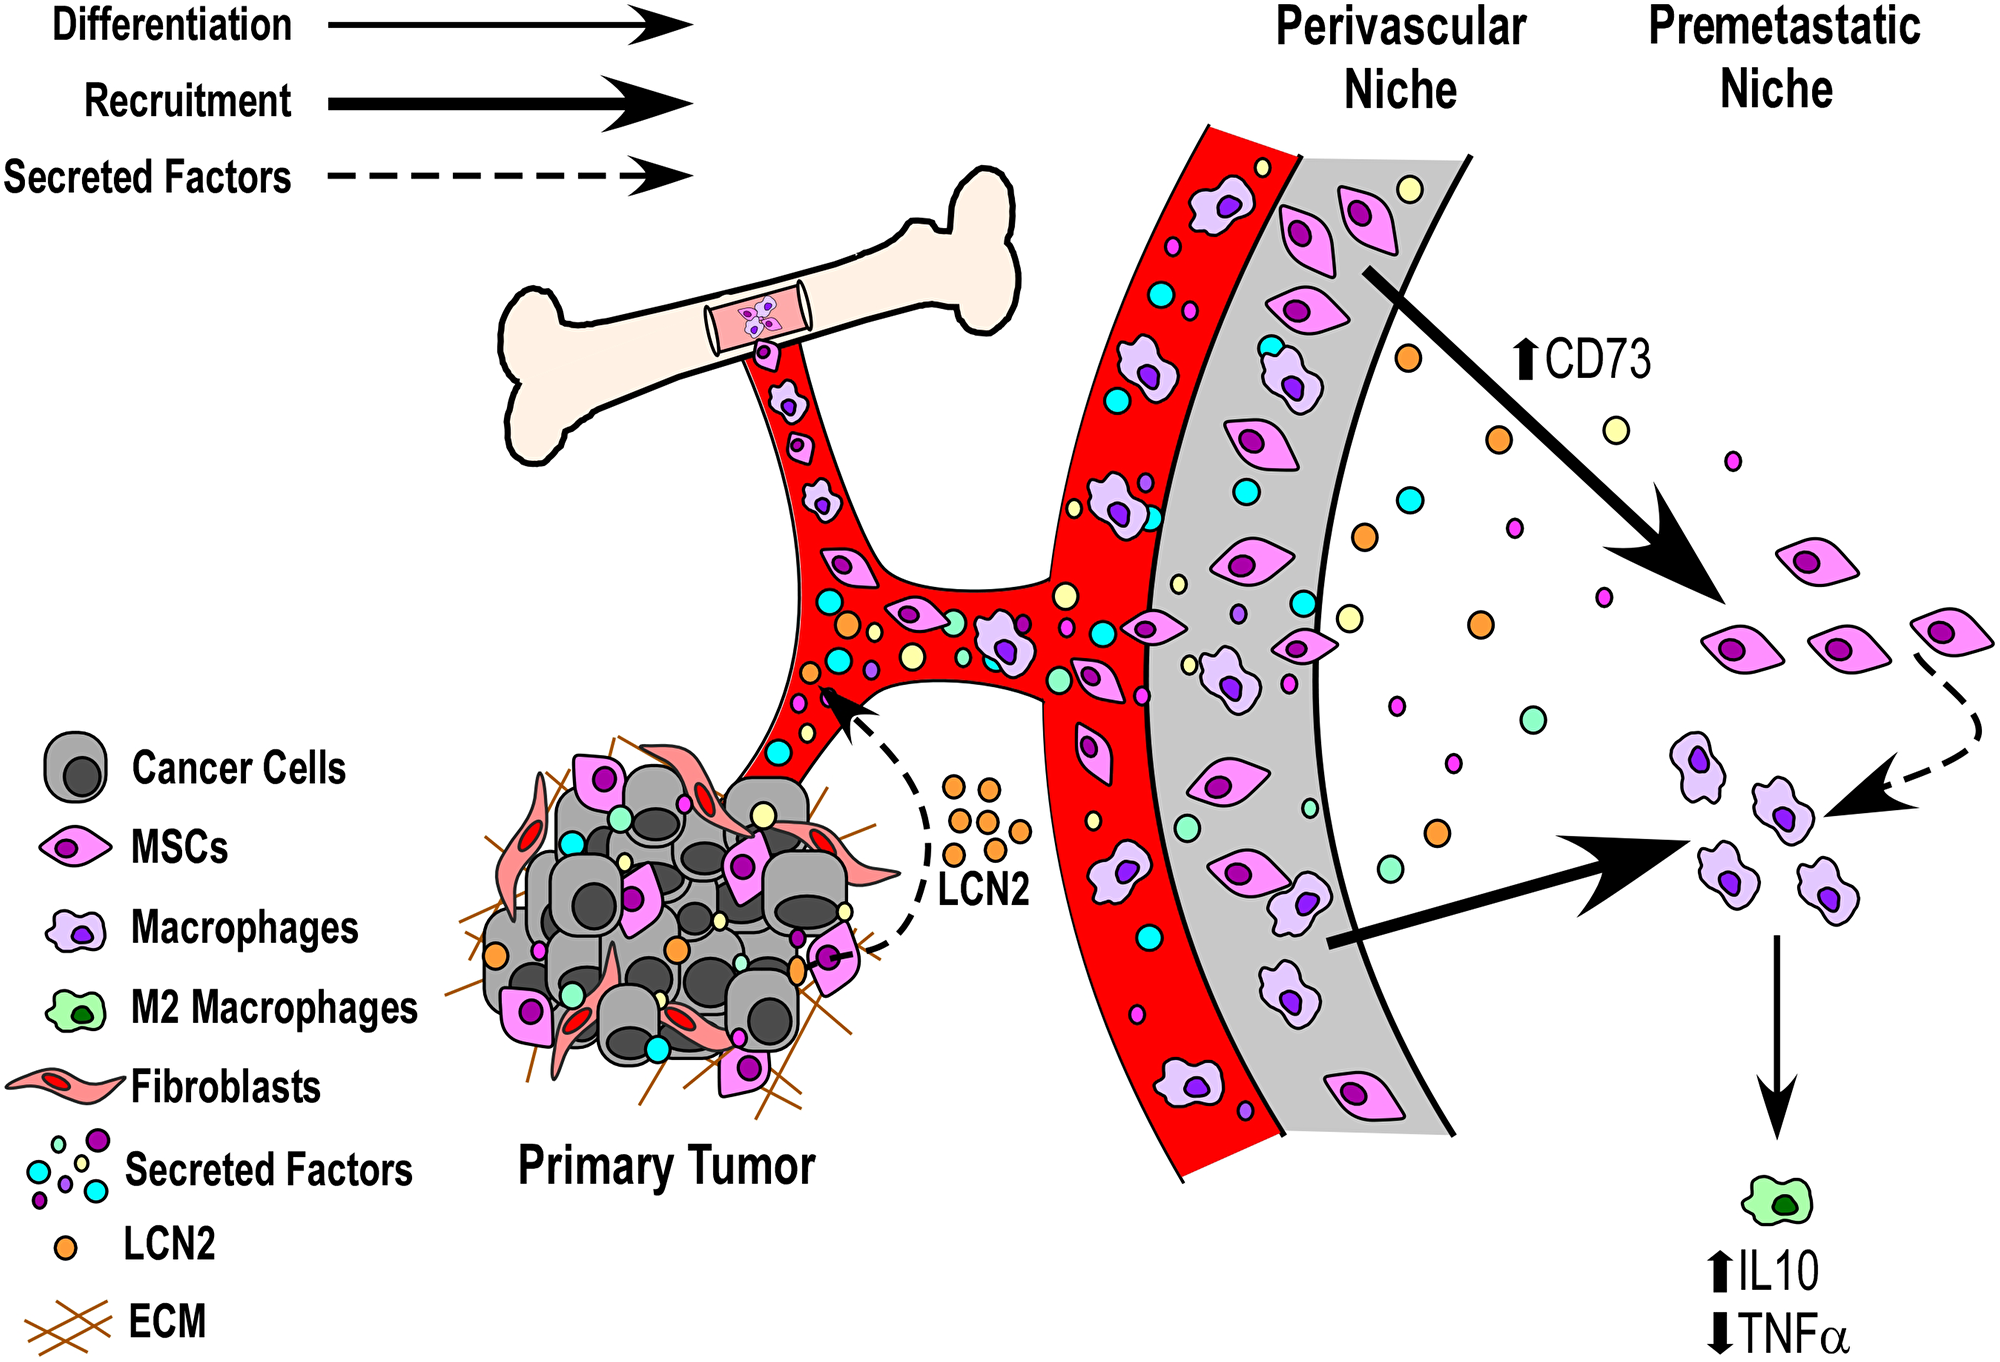 Model of potential mechanisms by which soluble factors from the primary breast tumors may induce an anti-inflammatory state within premetastatic tissues.